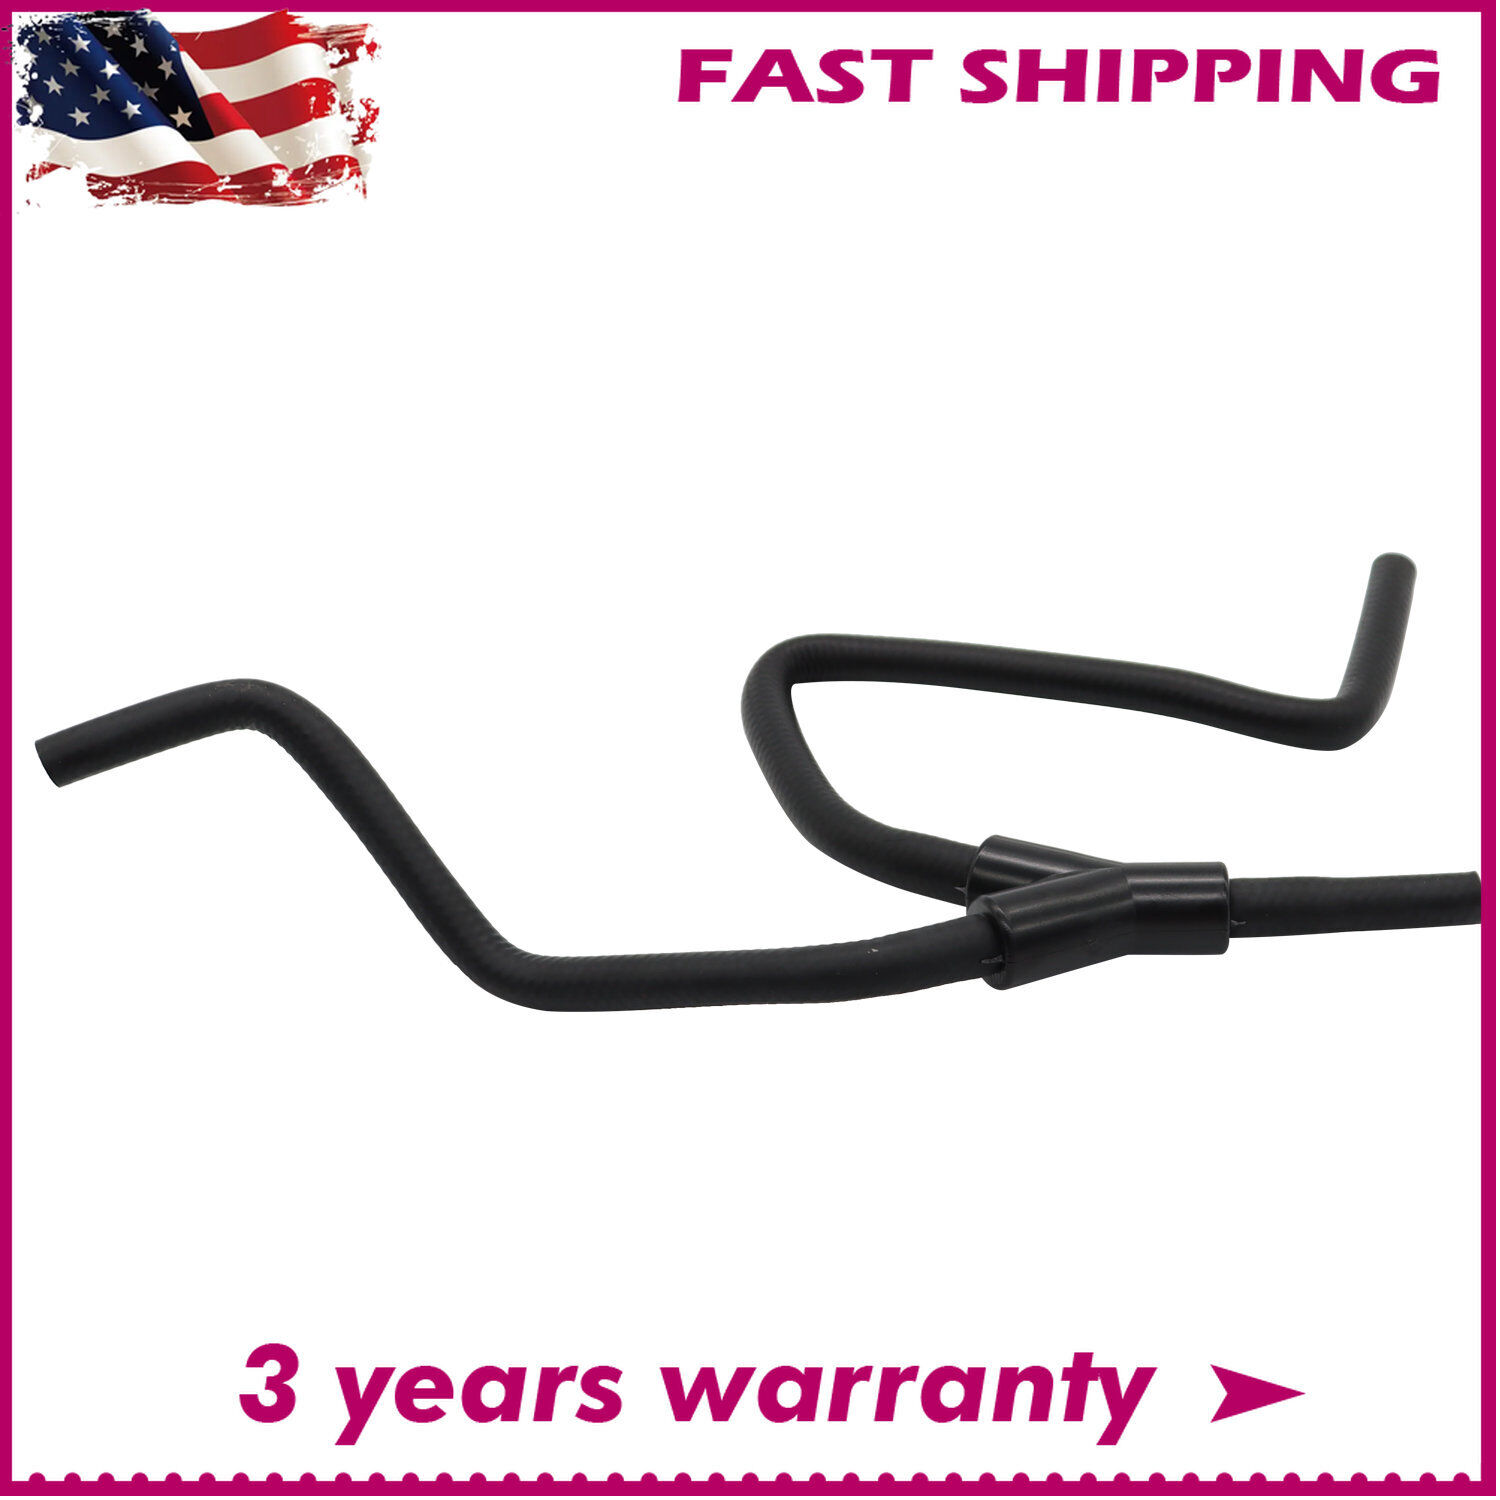 Upper Radiator Inlet Hose #22908202 Fit For Cadillac ATS CTS 2.0L I4 2013-19 New